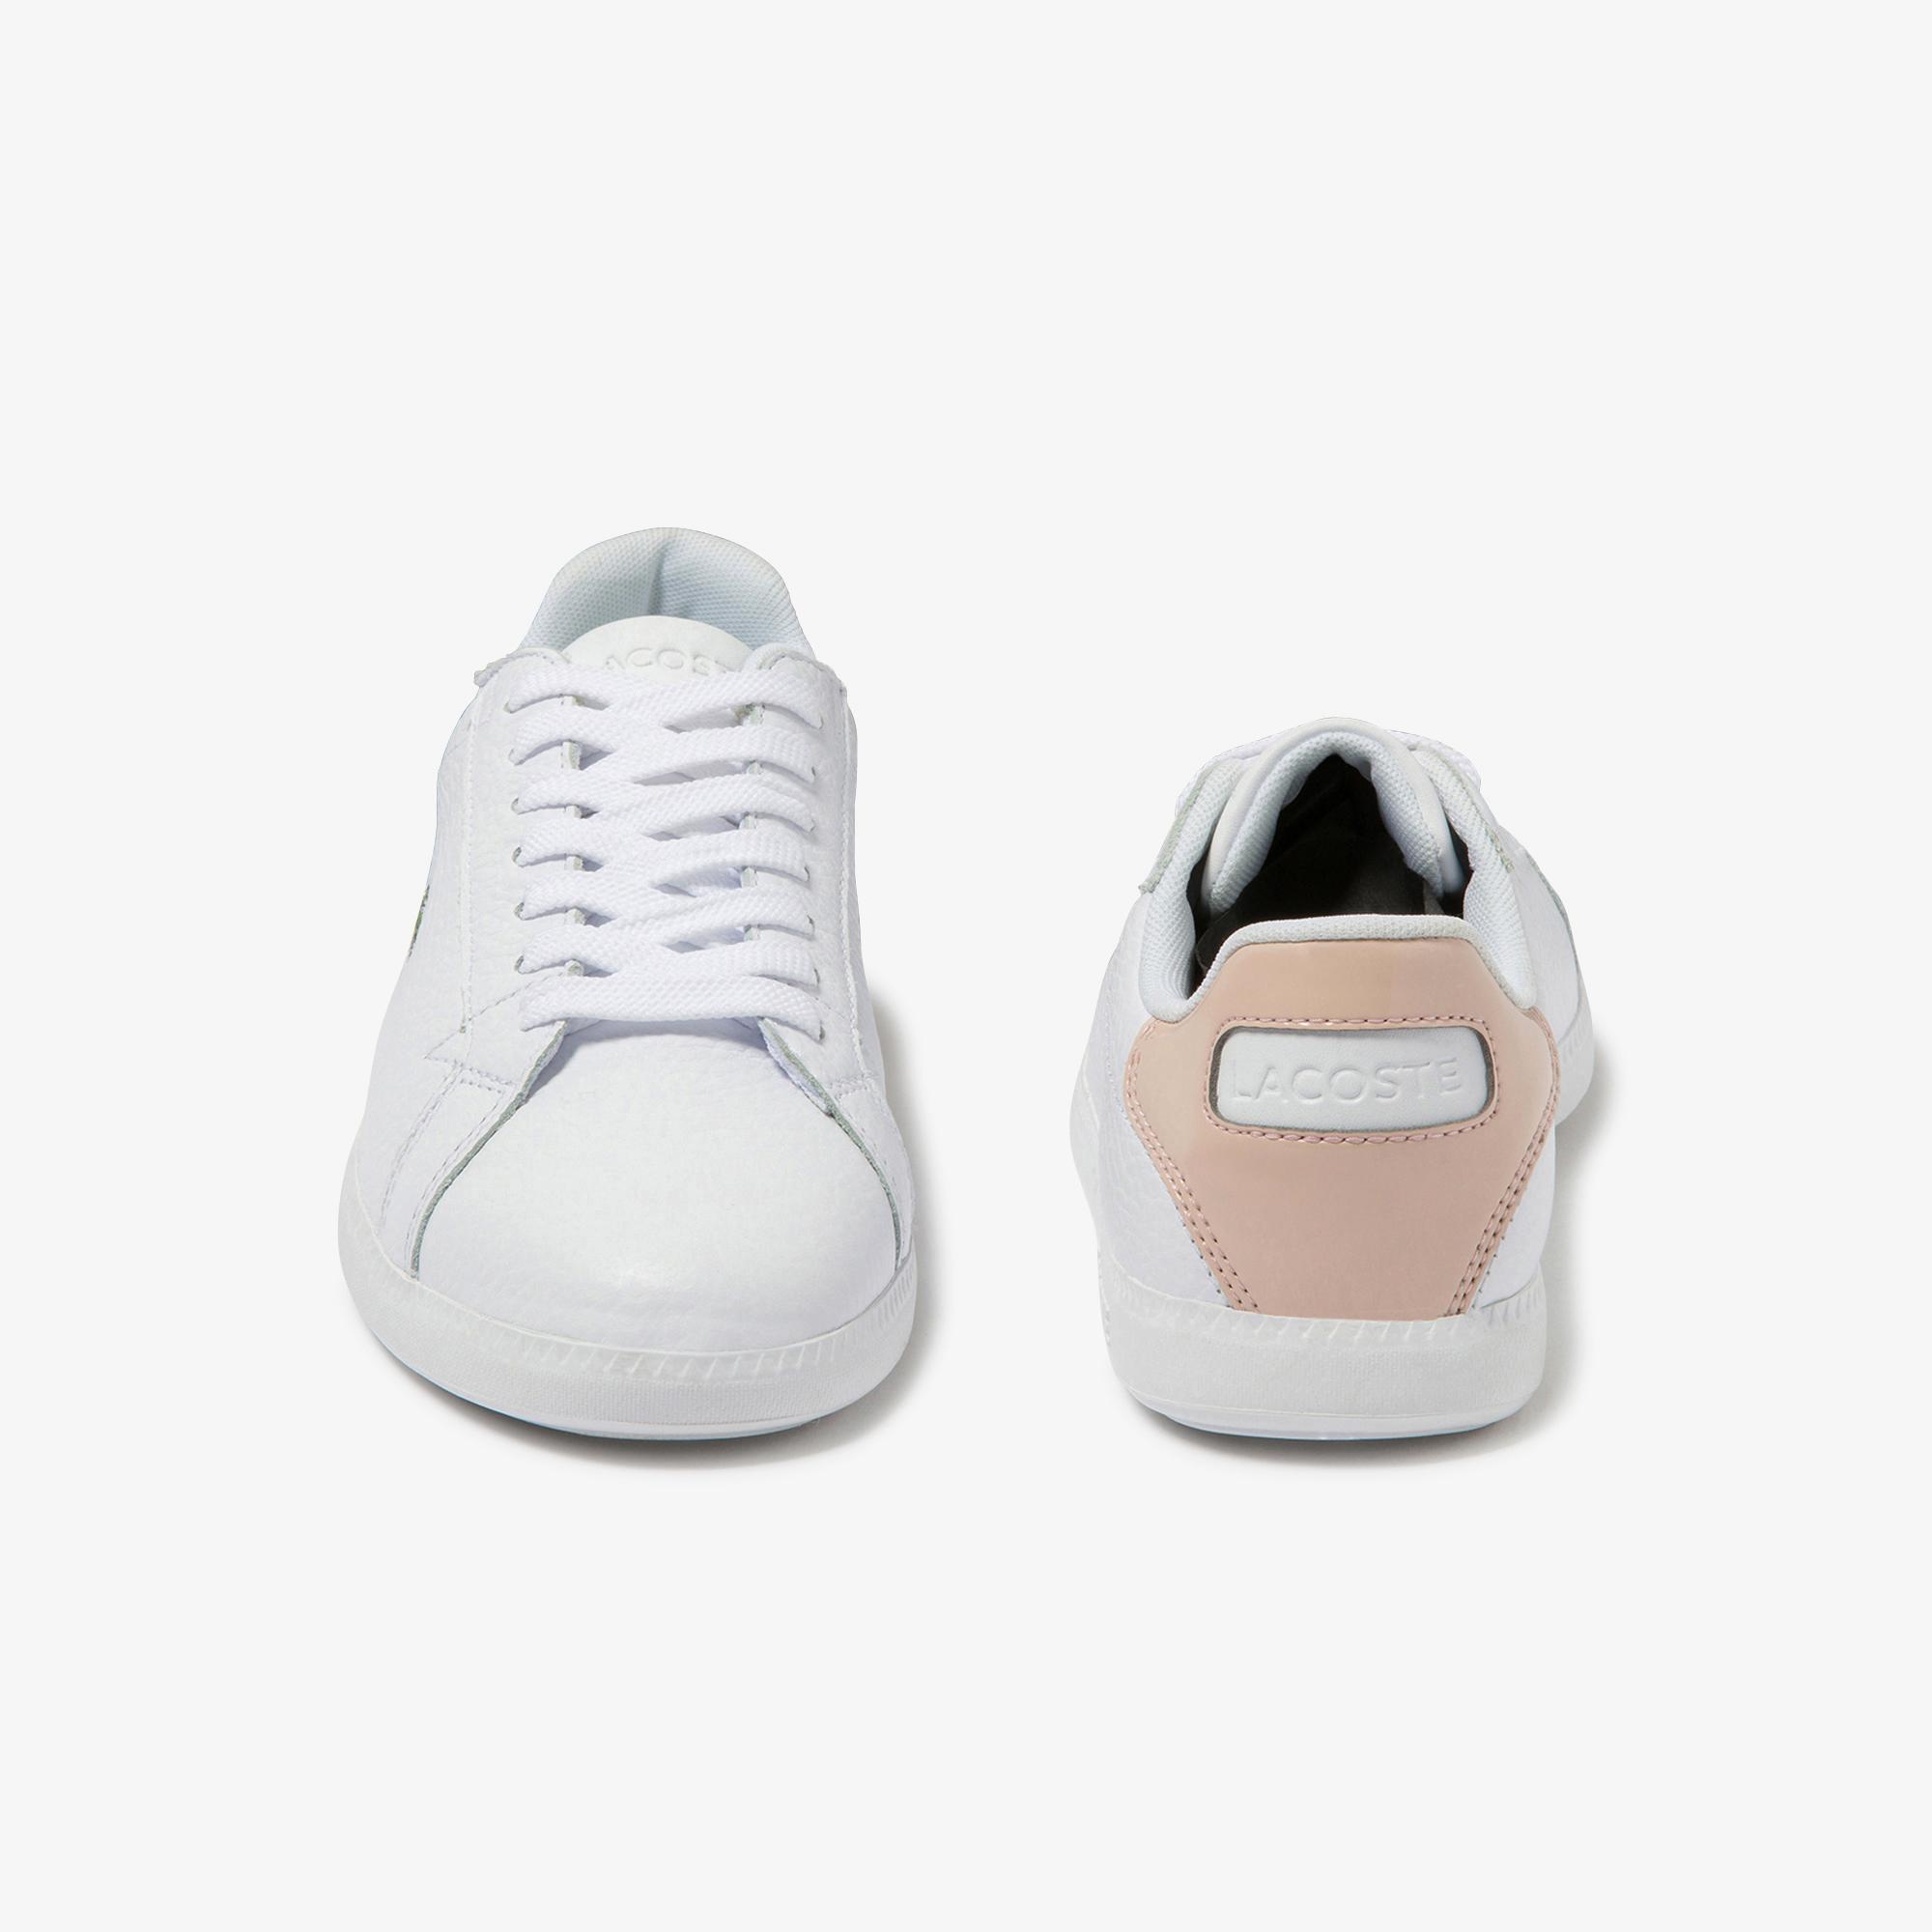 Lacoste Graduate 120 1 Sfa Women's white and pink sneakers